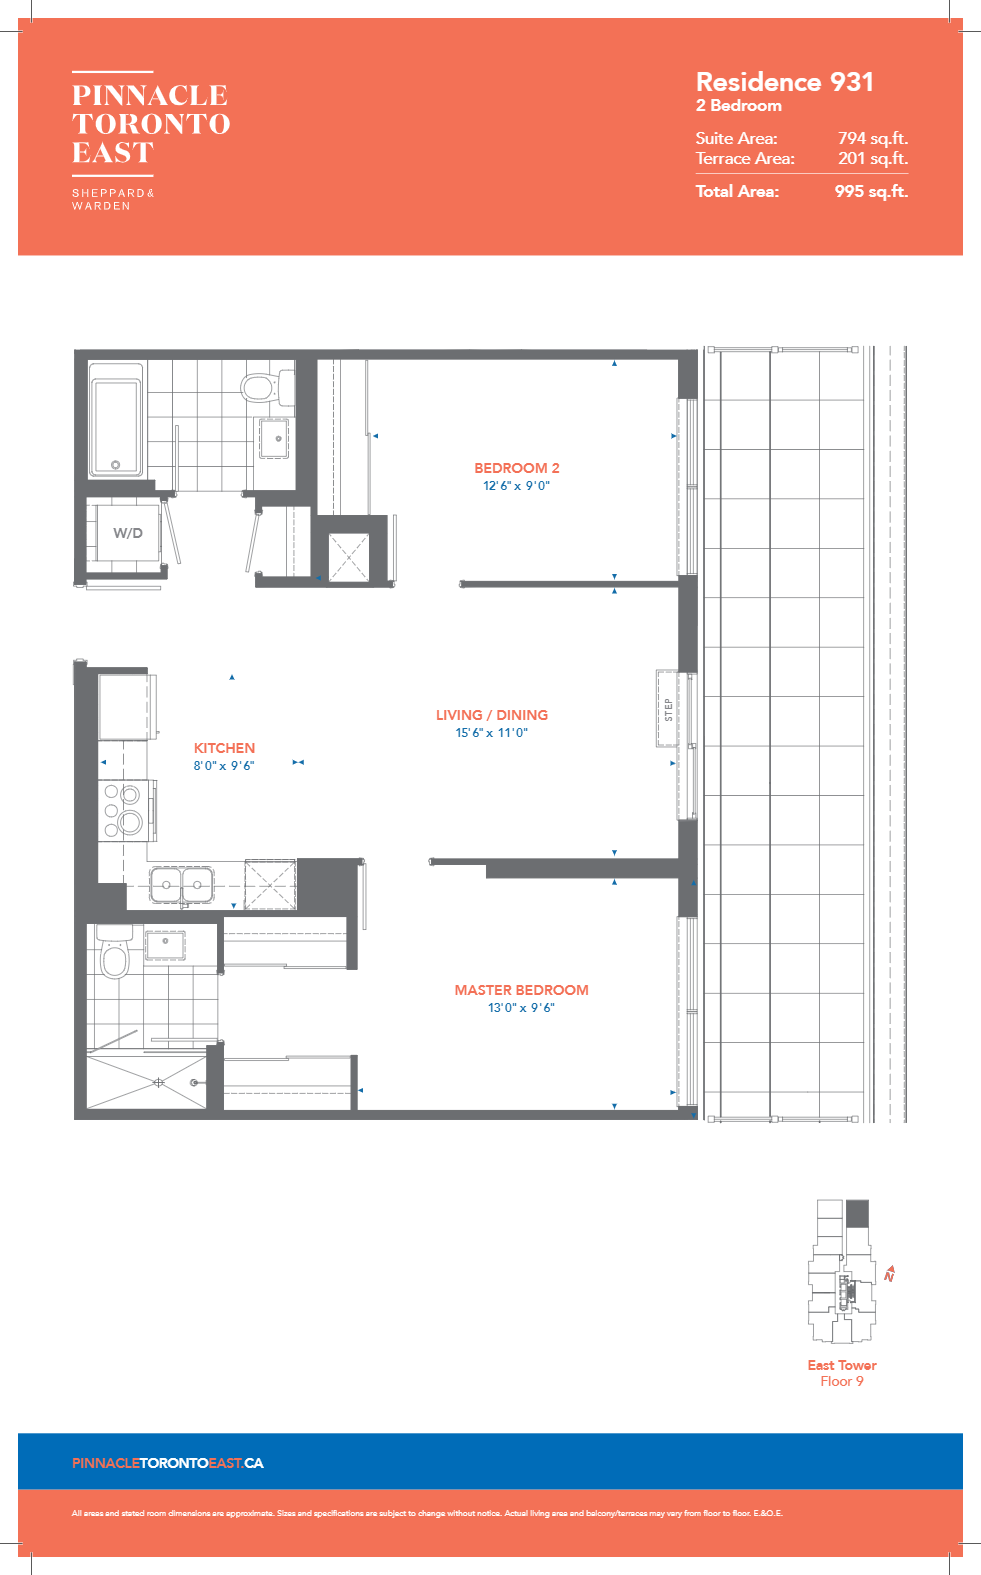 Residence 931 Floor Plan of Pinnacle Toronto East Condos with undefined beds